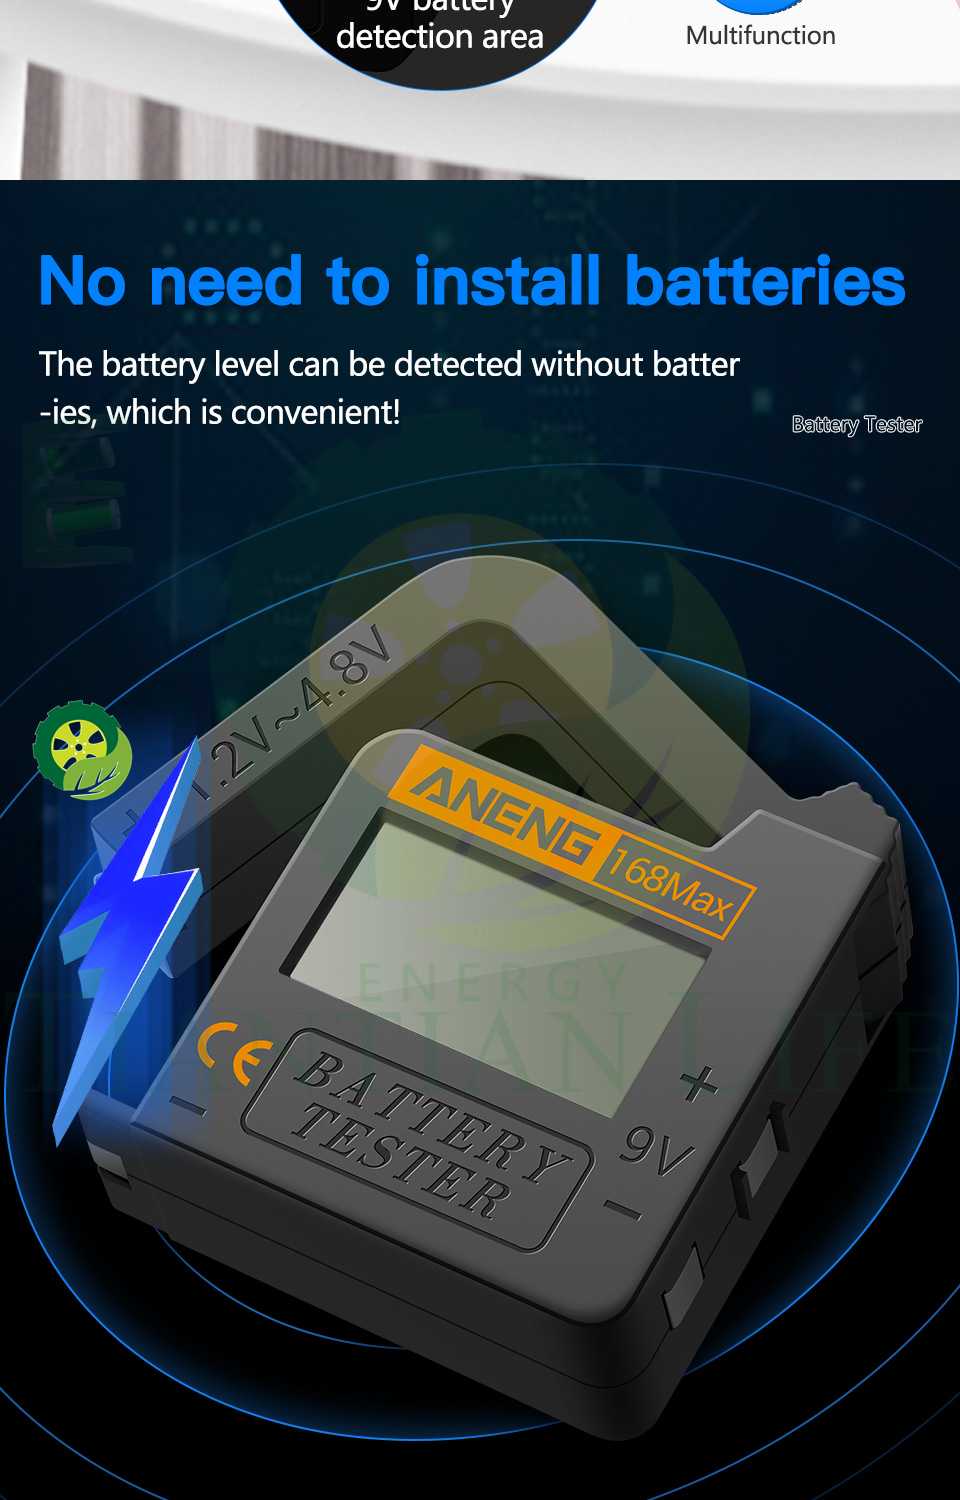 168Max Digital Lithium Battery Capacity Tester Universal test Checkered load analyzer Display Check AAA AA Button Cell TIANTIAN LIFE Market Place